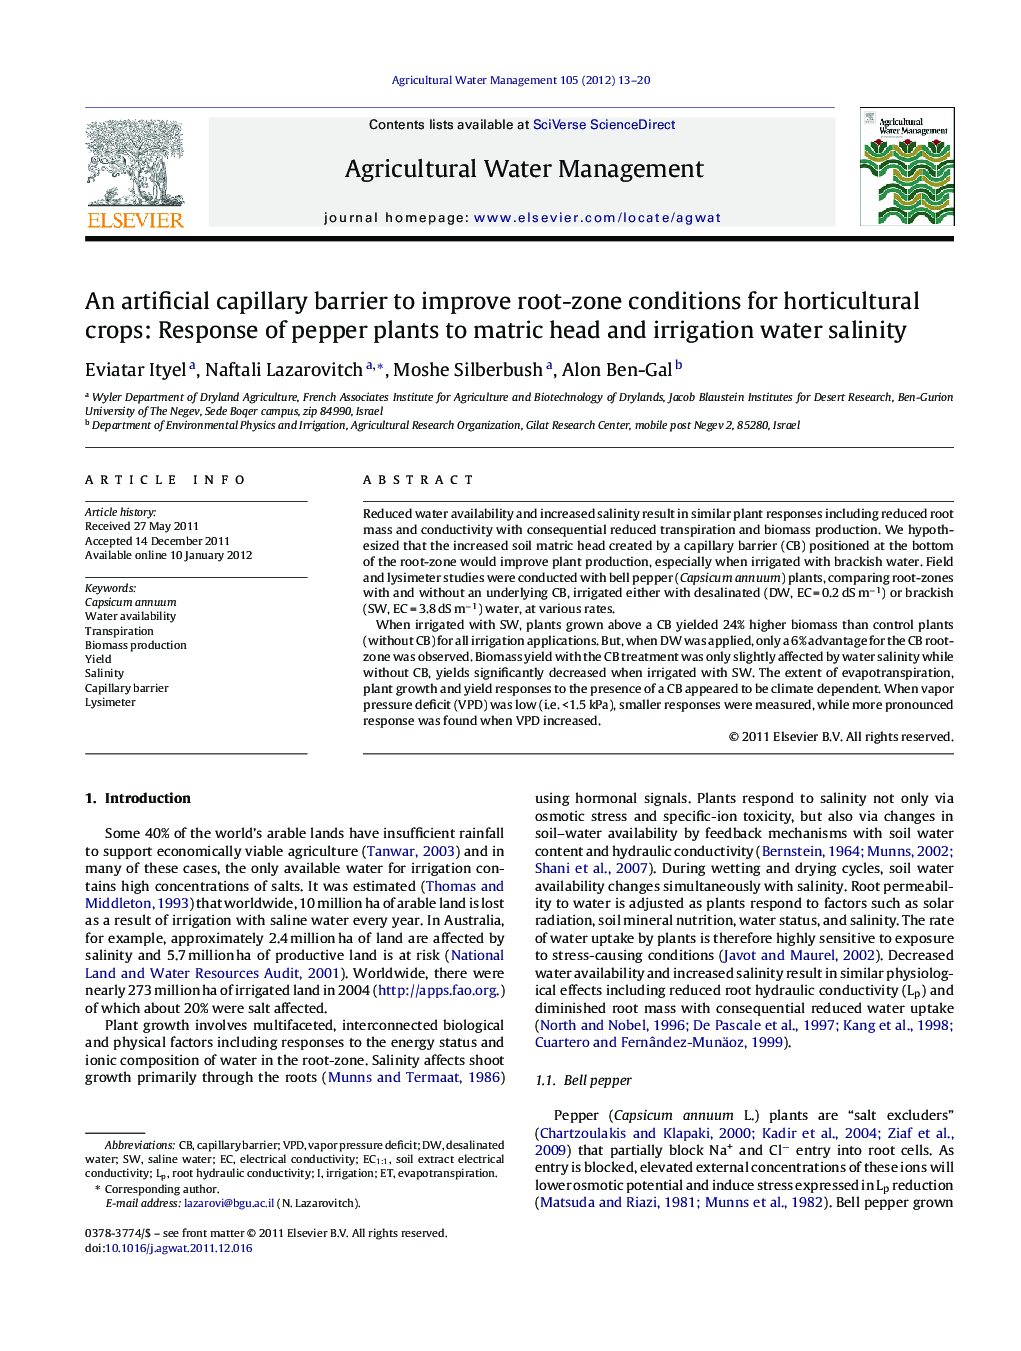 An artificial capillary barrier to improve root-zone conditions for horticultural crops: Response of pepper plants to matric head and irrigation water salinity